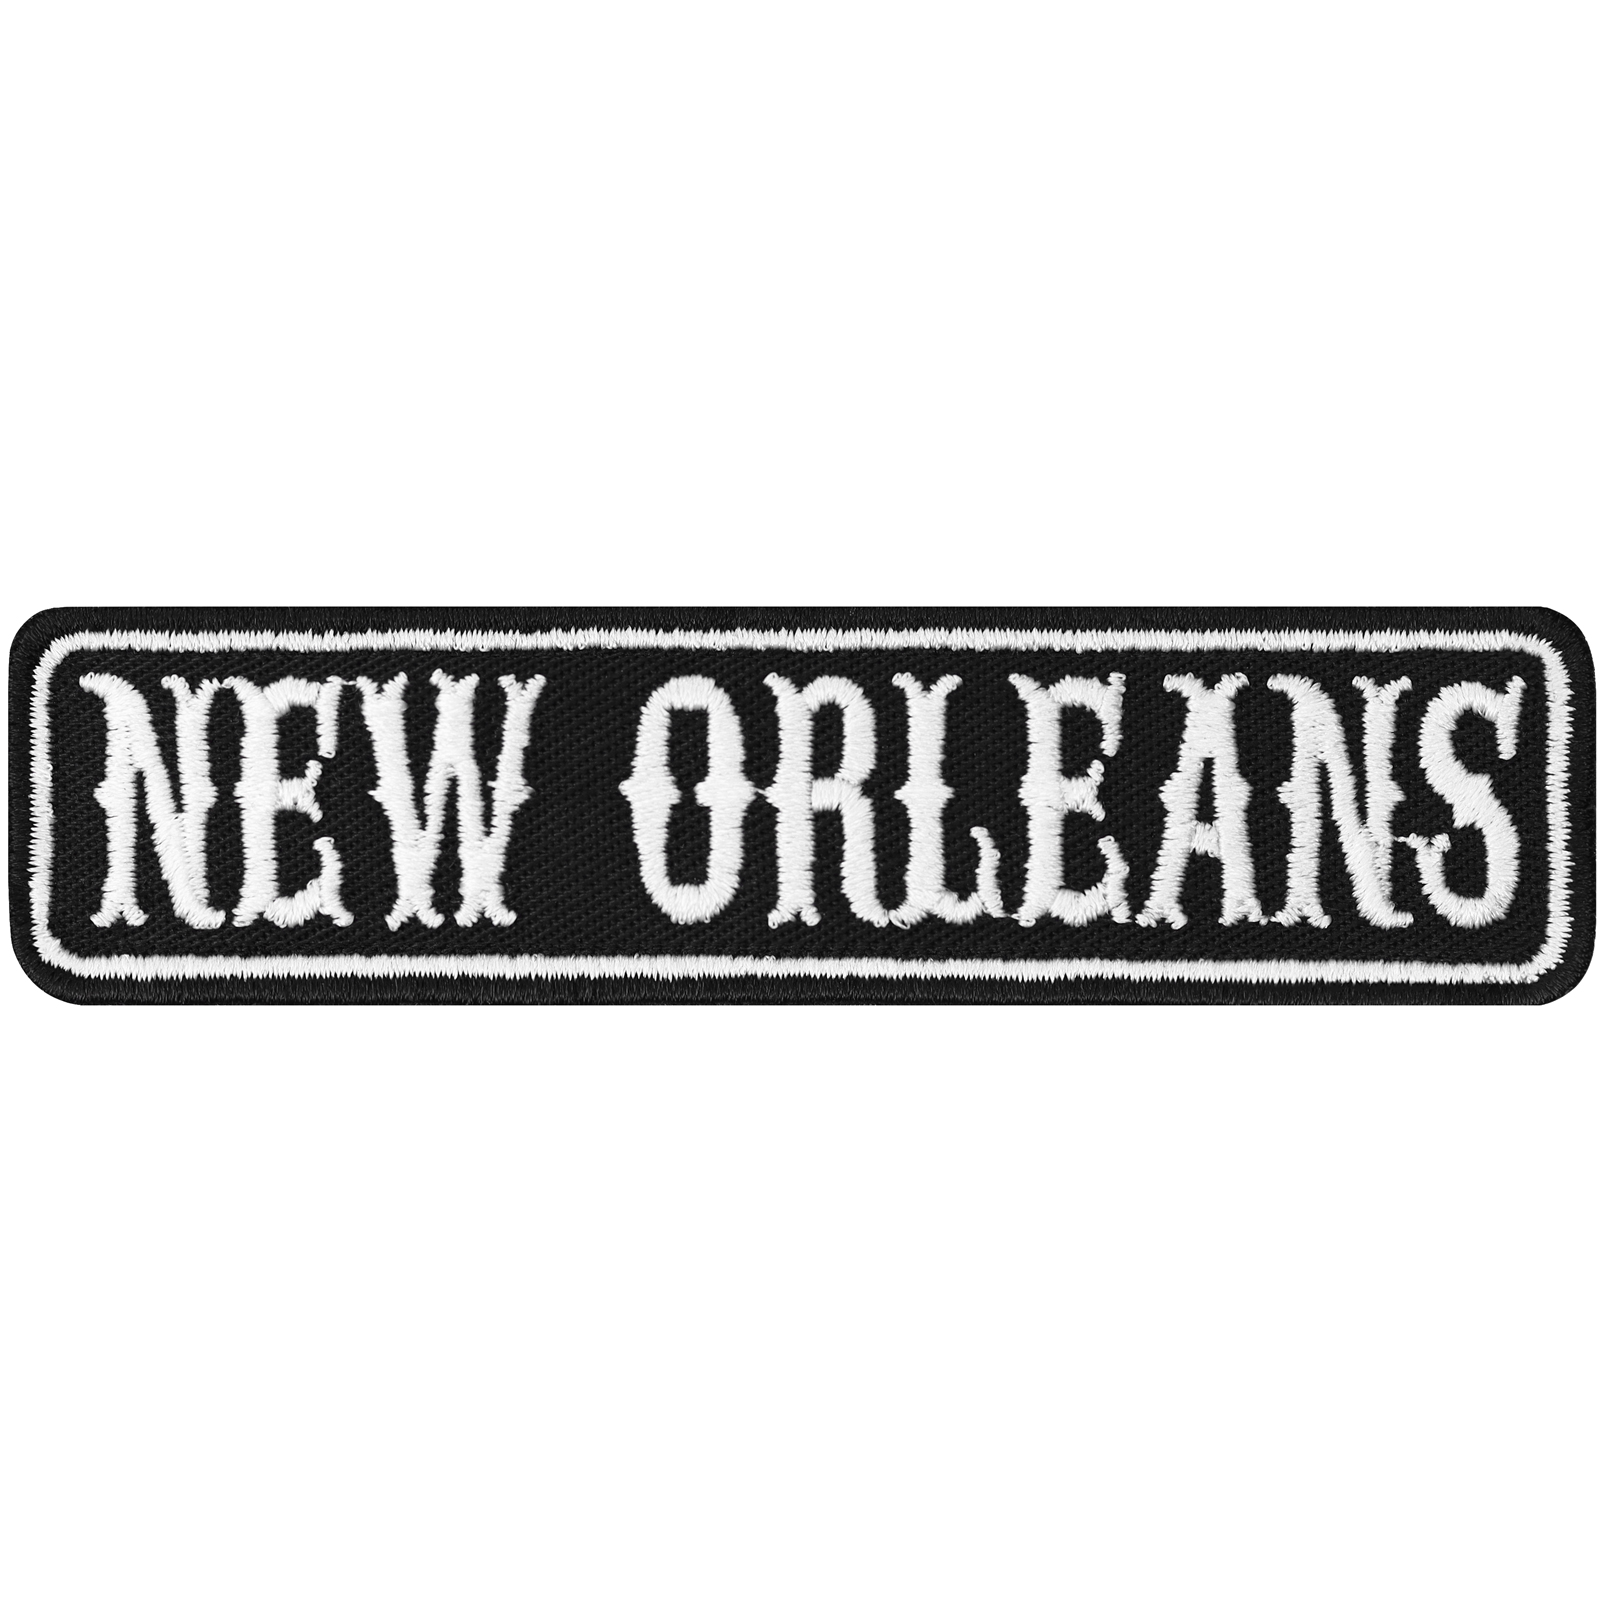 New Orleans - Patch